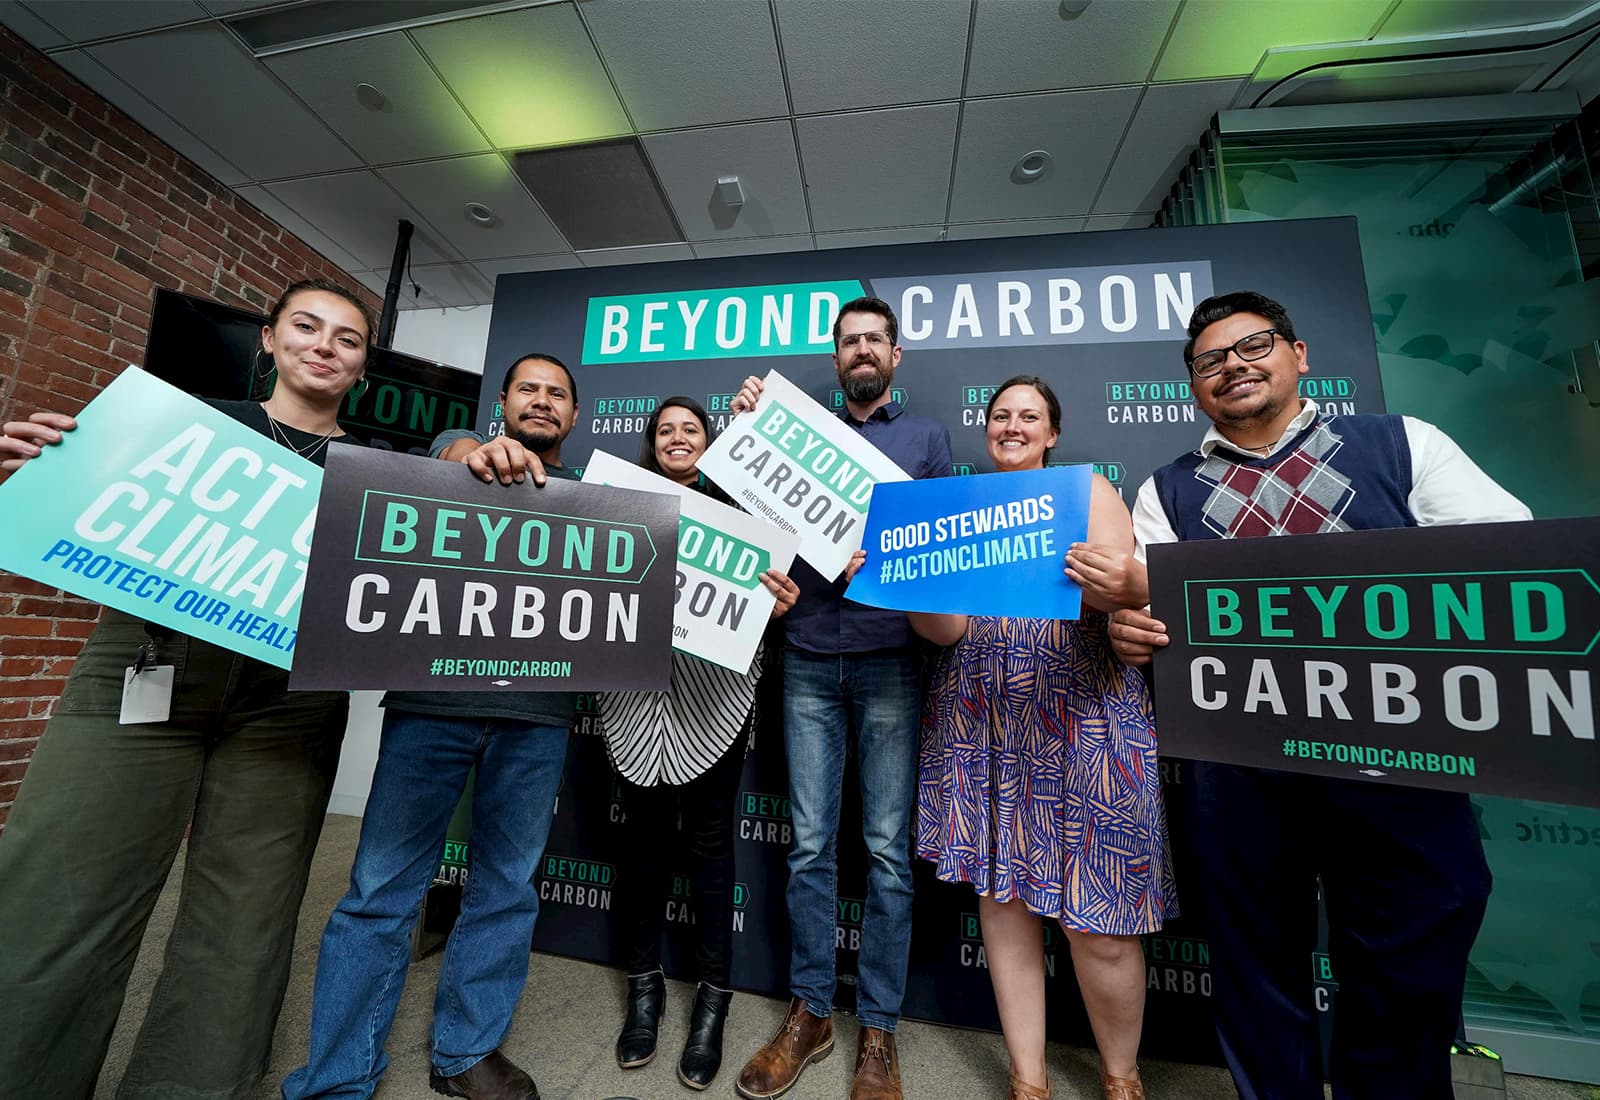 Grassroots volunteers and advocates at a Beyond Carbon event in Denver, Colorado.